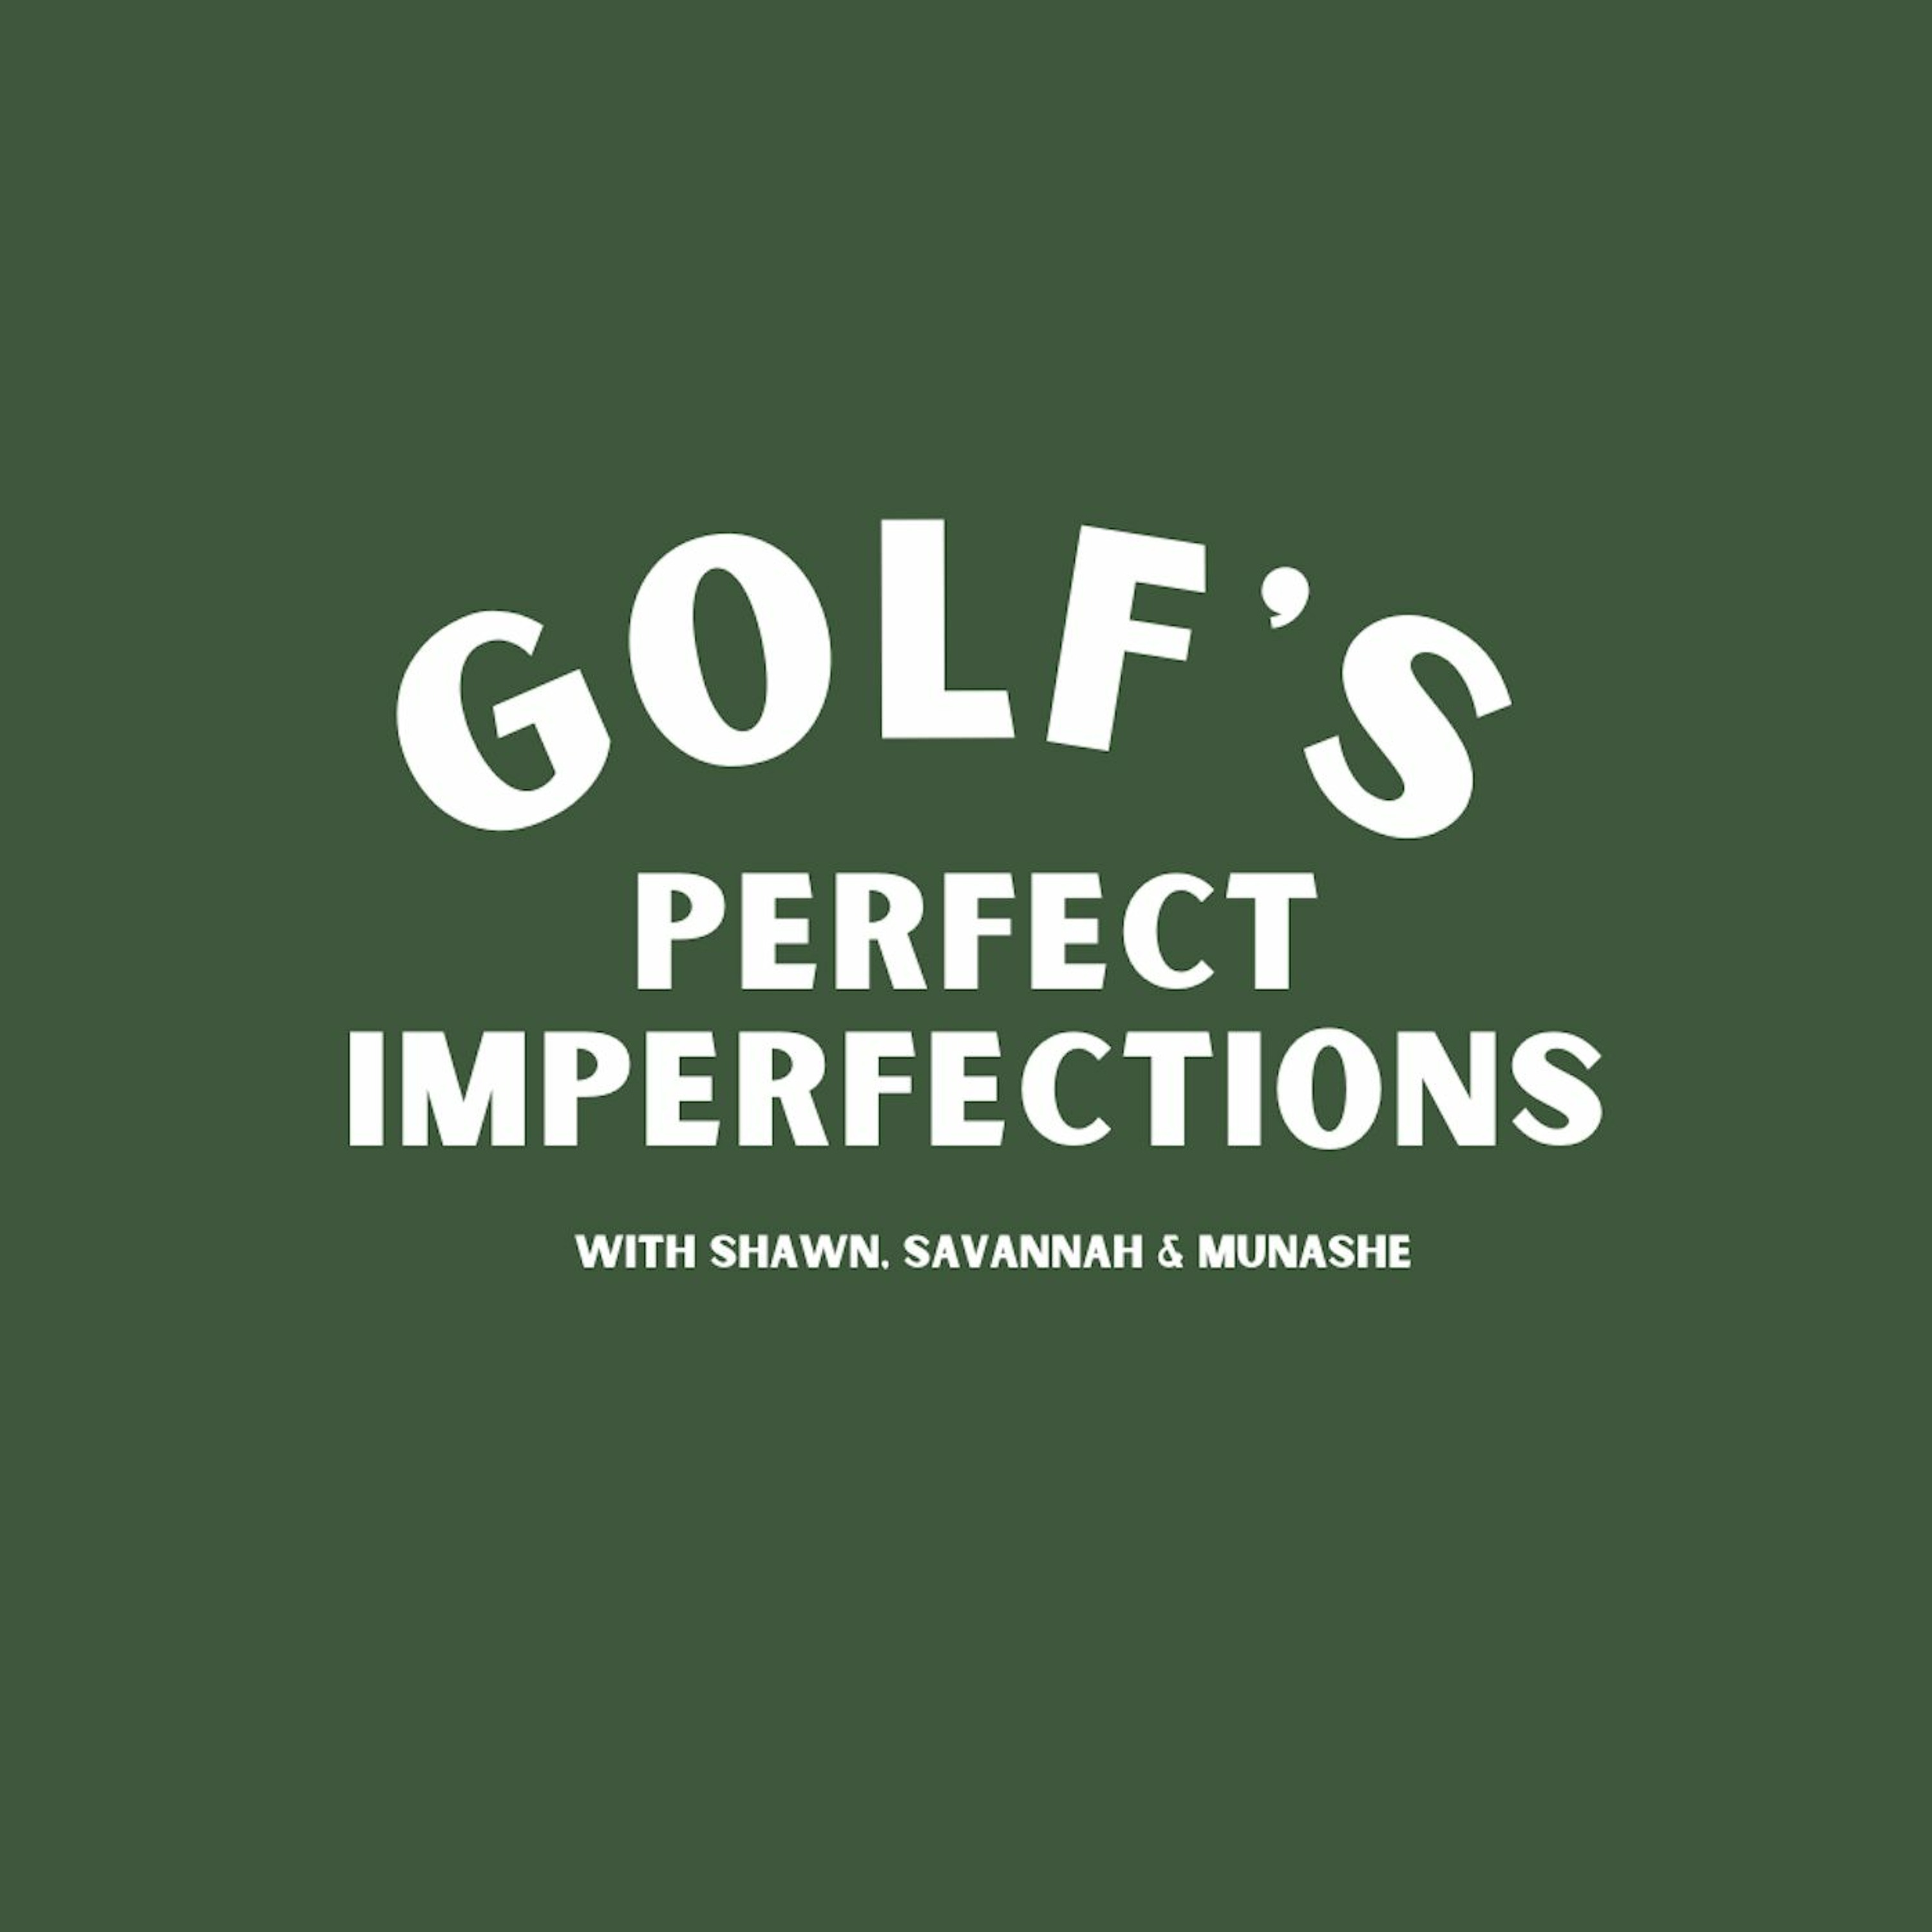 Golf's Perfect Imperfections: Rolling back the Laughs